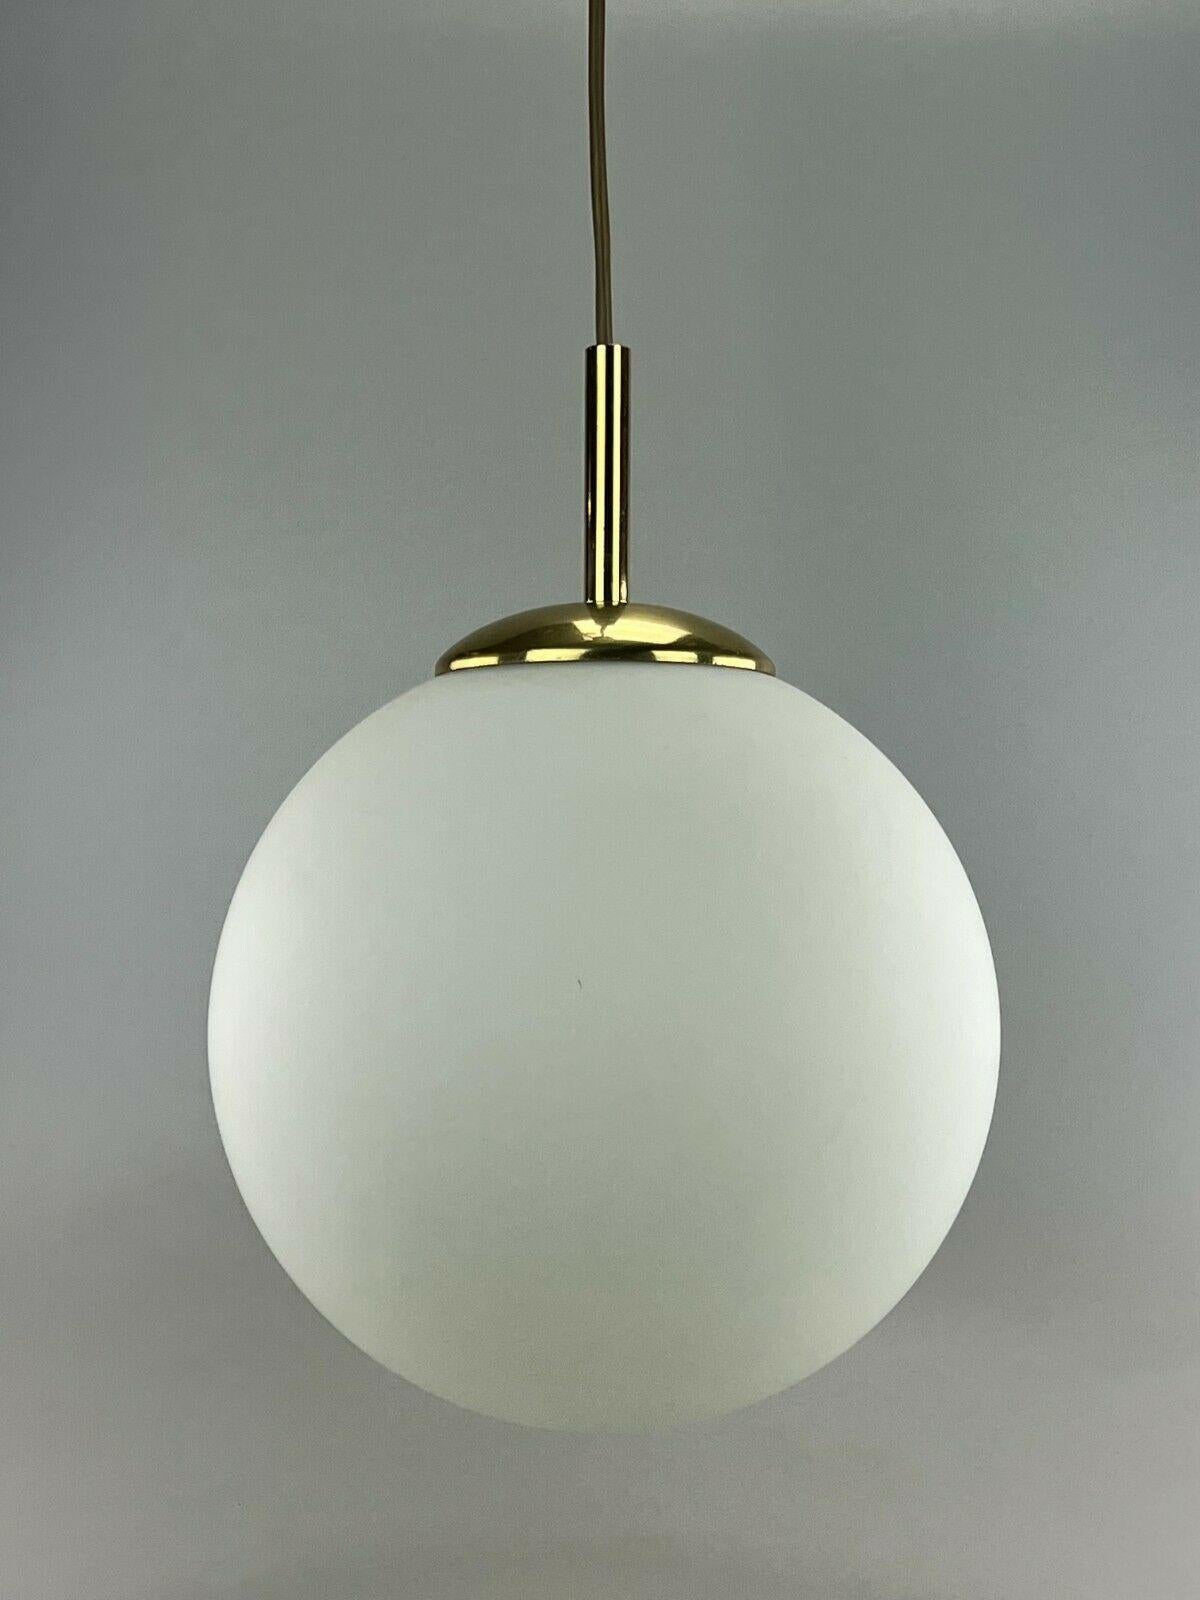 60s 70s Lamp ceiling lamp ball lamp opal brass glass space age design

Object: ceiling lamp

Manufacturer:

Condition: good

Age: around 1960-1970

Dimensions:

Diameter = 30cm
Height = 40cm

Other notes:

The pictures serve as part